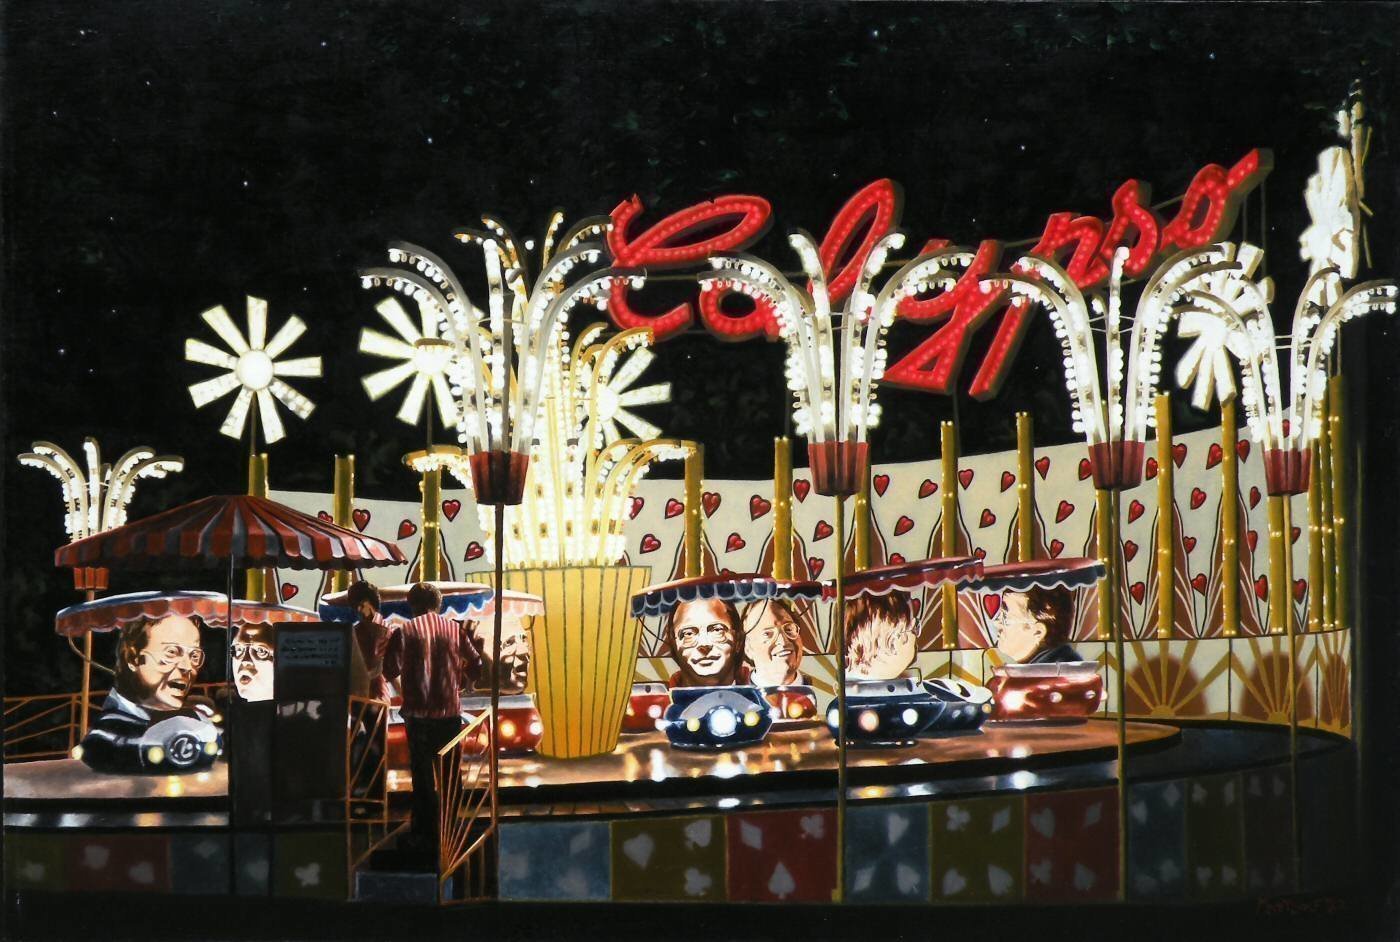 Dave Martsolf, 'Calypso', 1982, original Painting Oil, 50 x 34  x 2 inches. Artwork description: 5871 The giant heads each show a different emotional state.  Life is a carnival.  Are we all just passengers in bumper cars, or can we work toward emotional states we prefermartsolf, oil, painting, surreal, surrealism, surrealistic, busts, heads, portrait, carnival, circus, ride, thrill, night, lights...